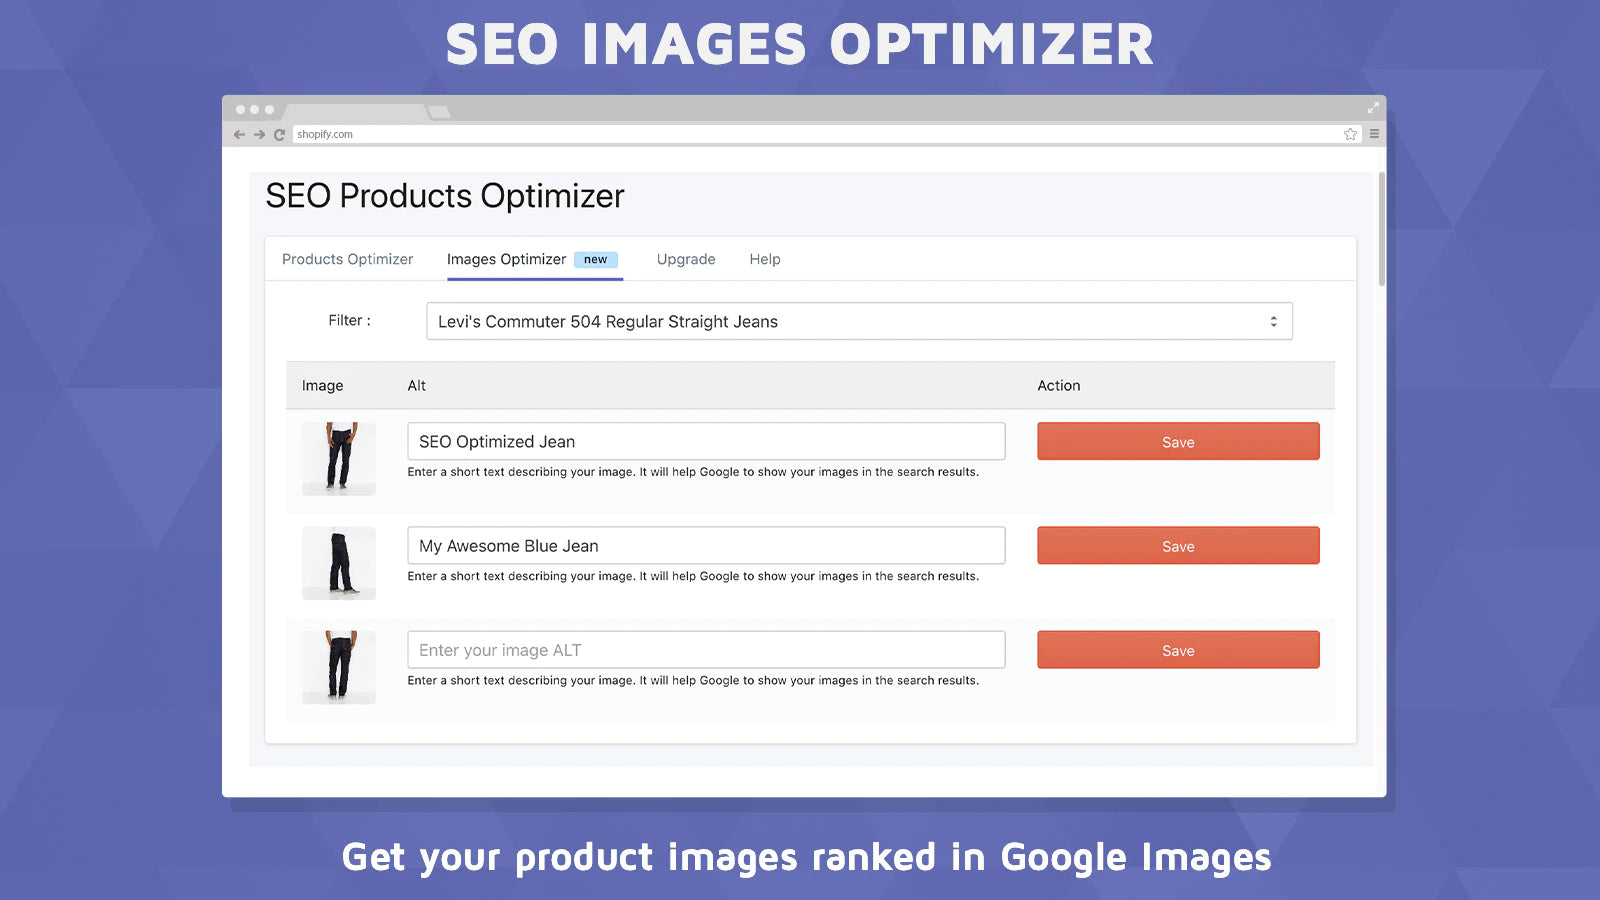 GoSEO ‑ SEO Products Optimizer get your product images ranked in Google Images 